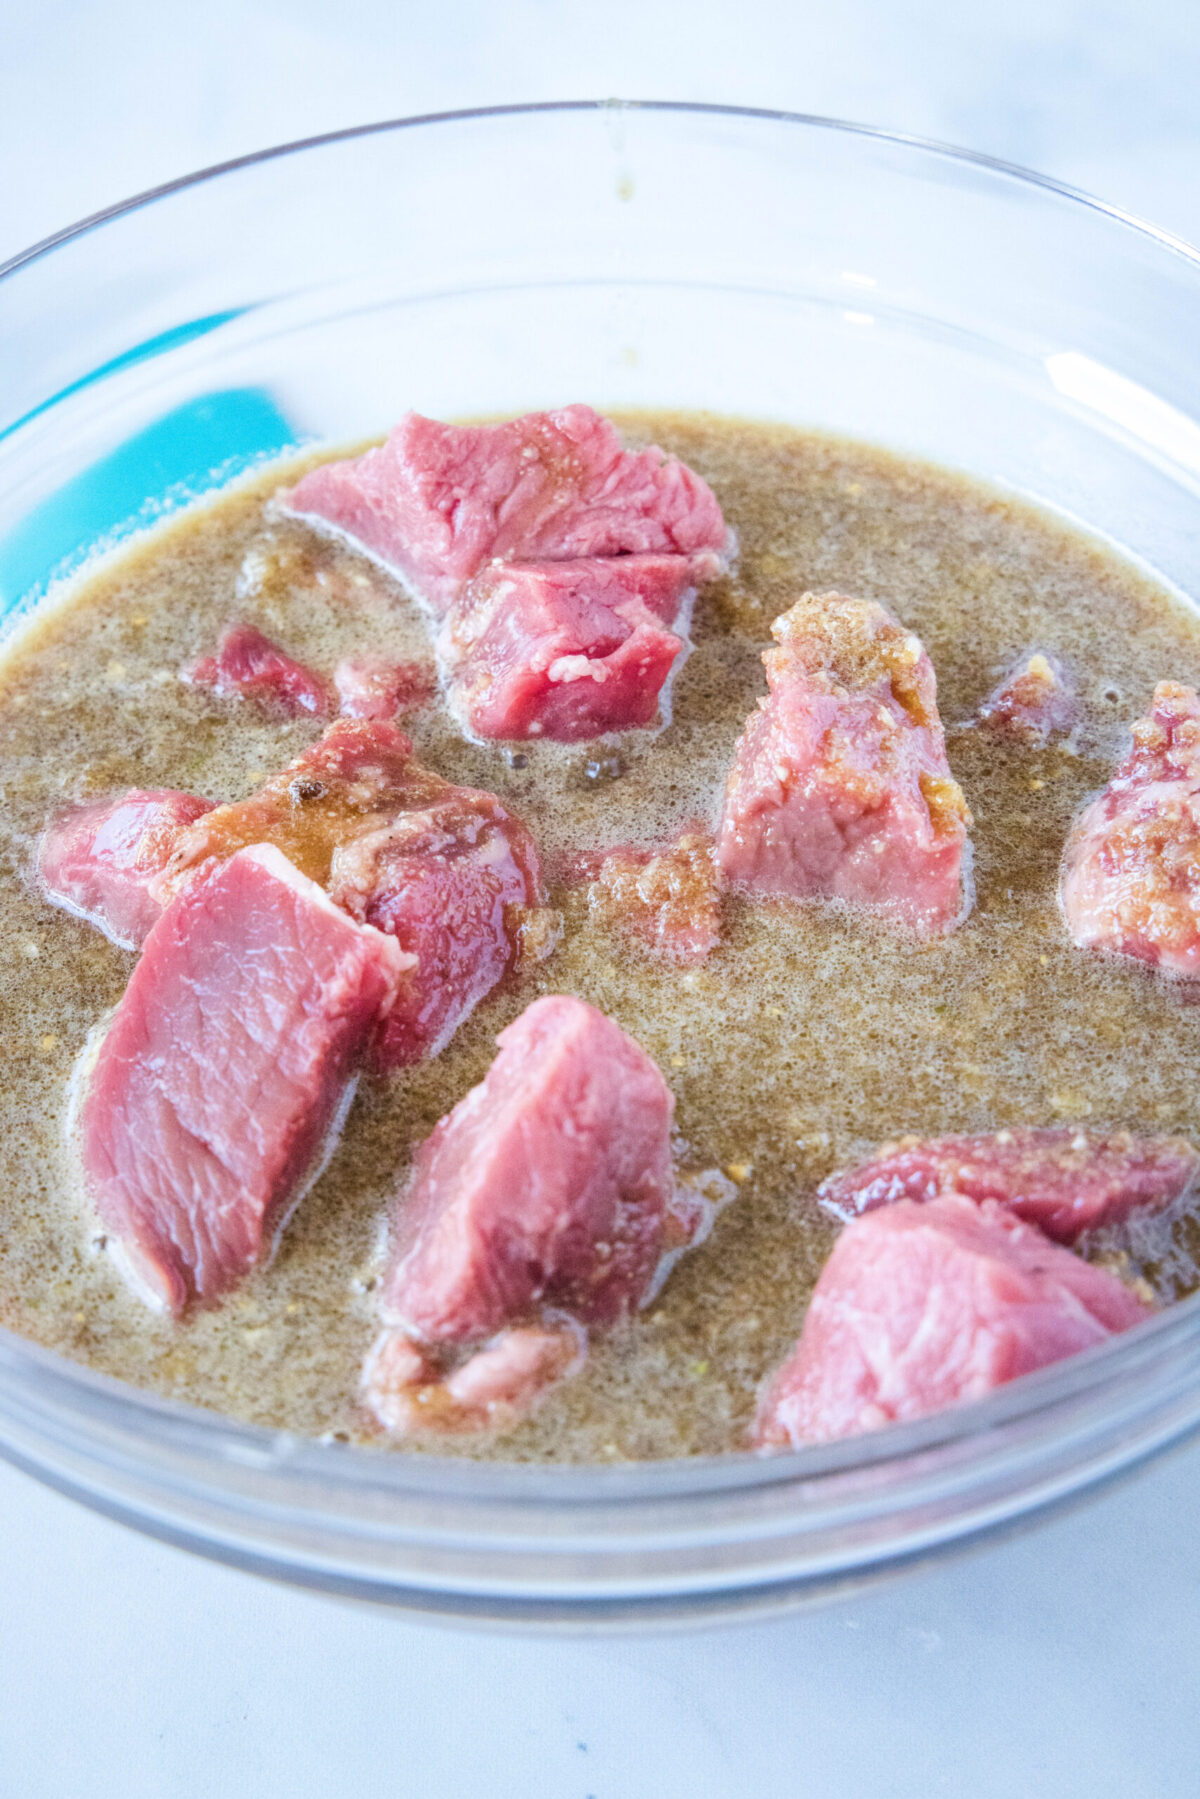 Cubes of beef in a mixing bowl with marinade